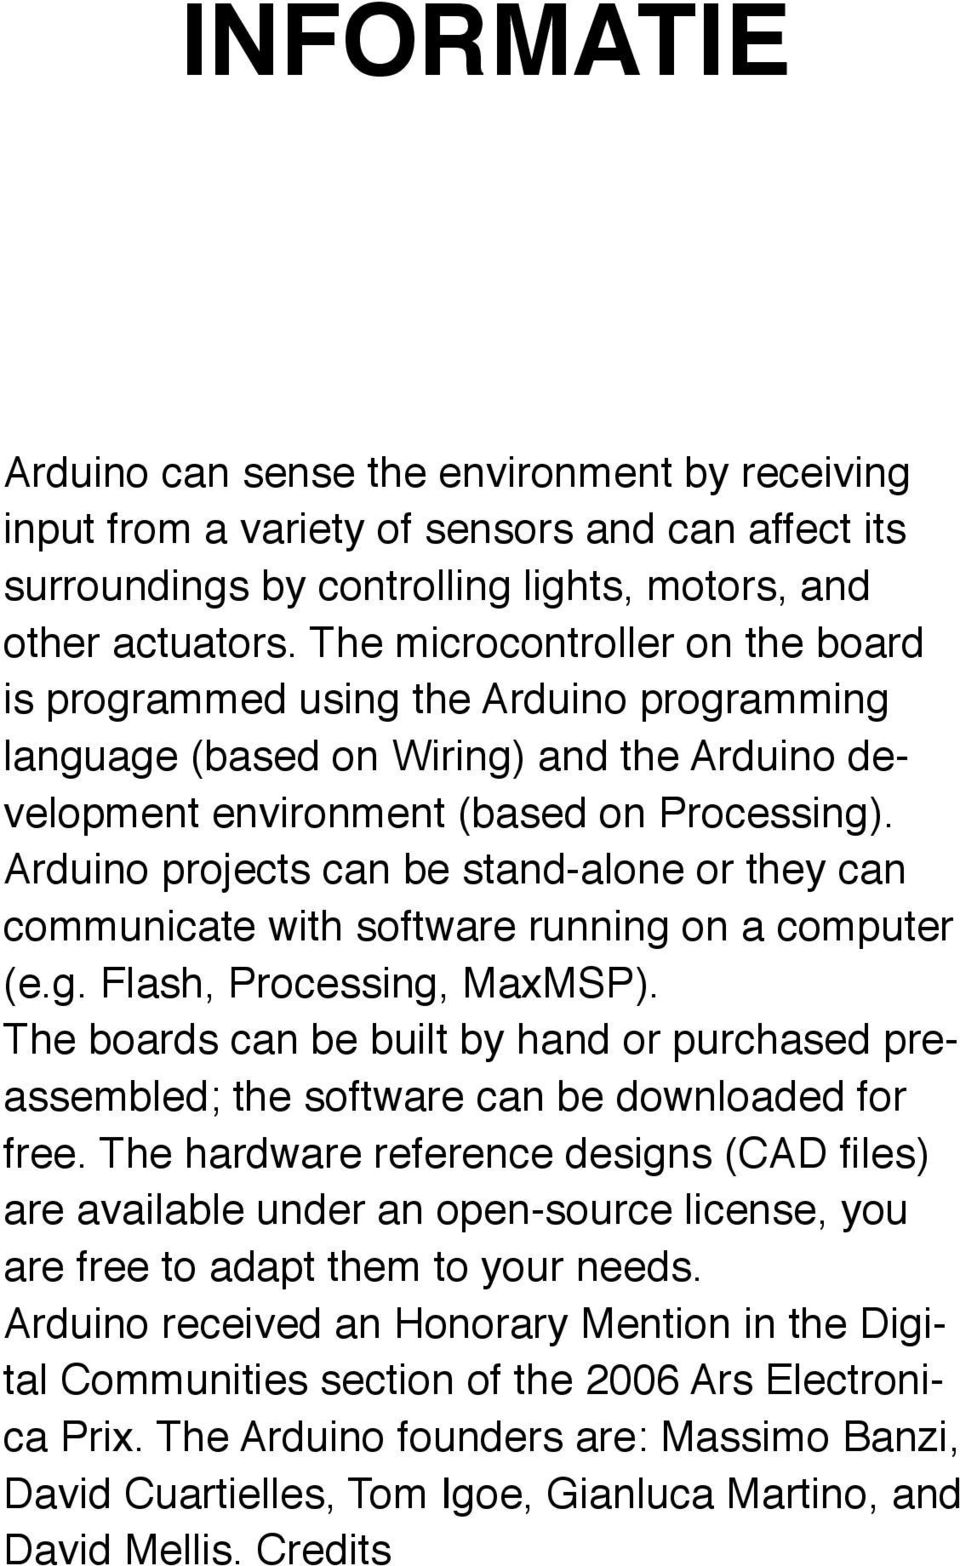 Arduino projects can be stand-alone or they can communicate with software running on a computer (e.g. Flash, Processing, MaxMSP).